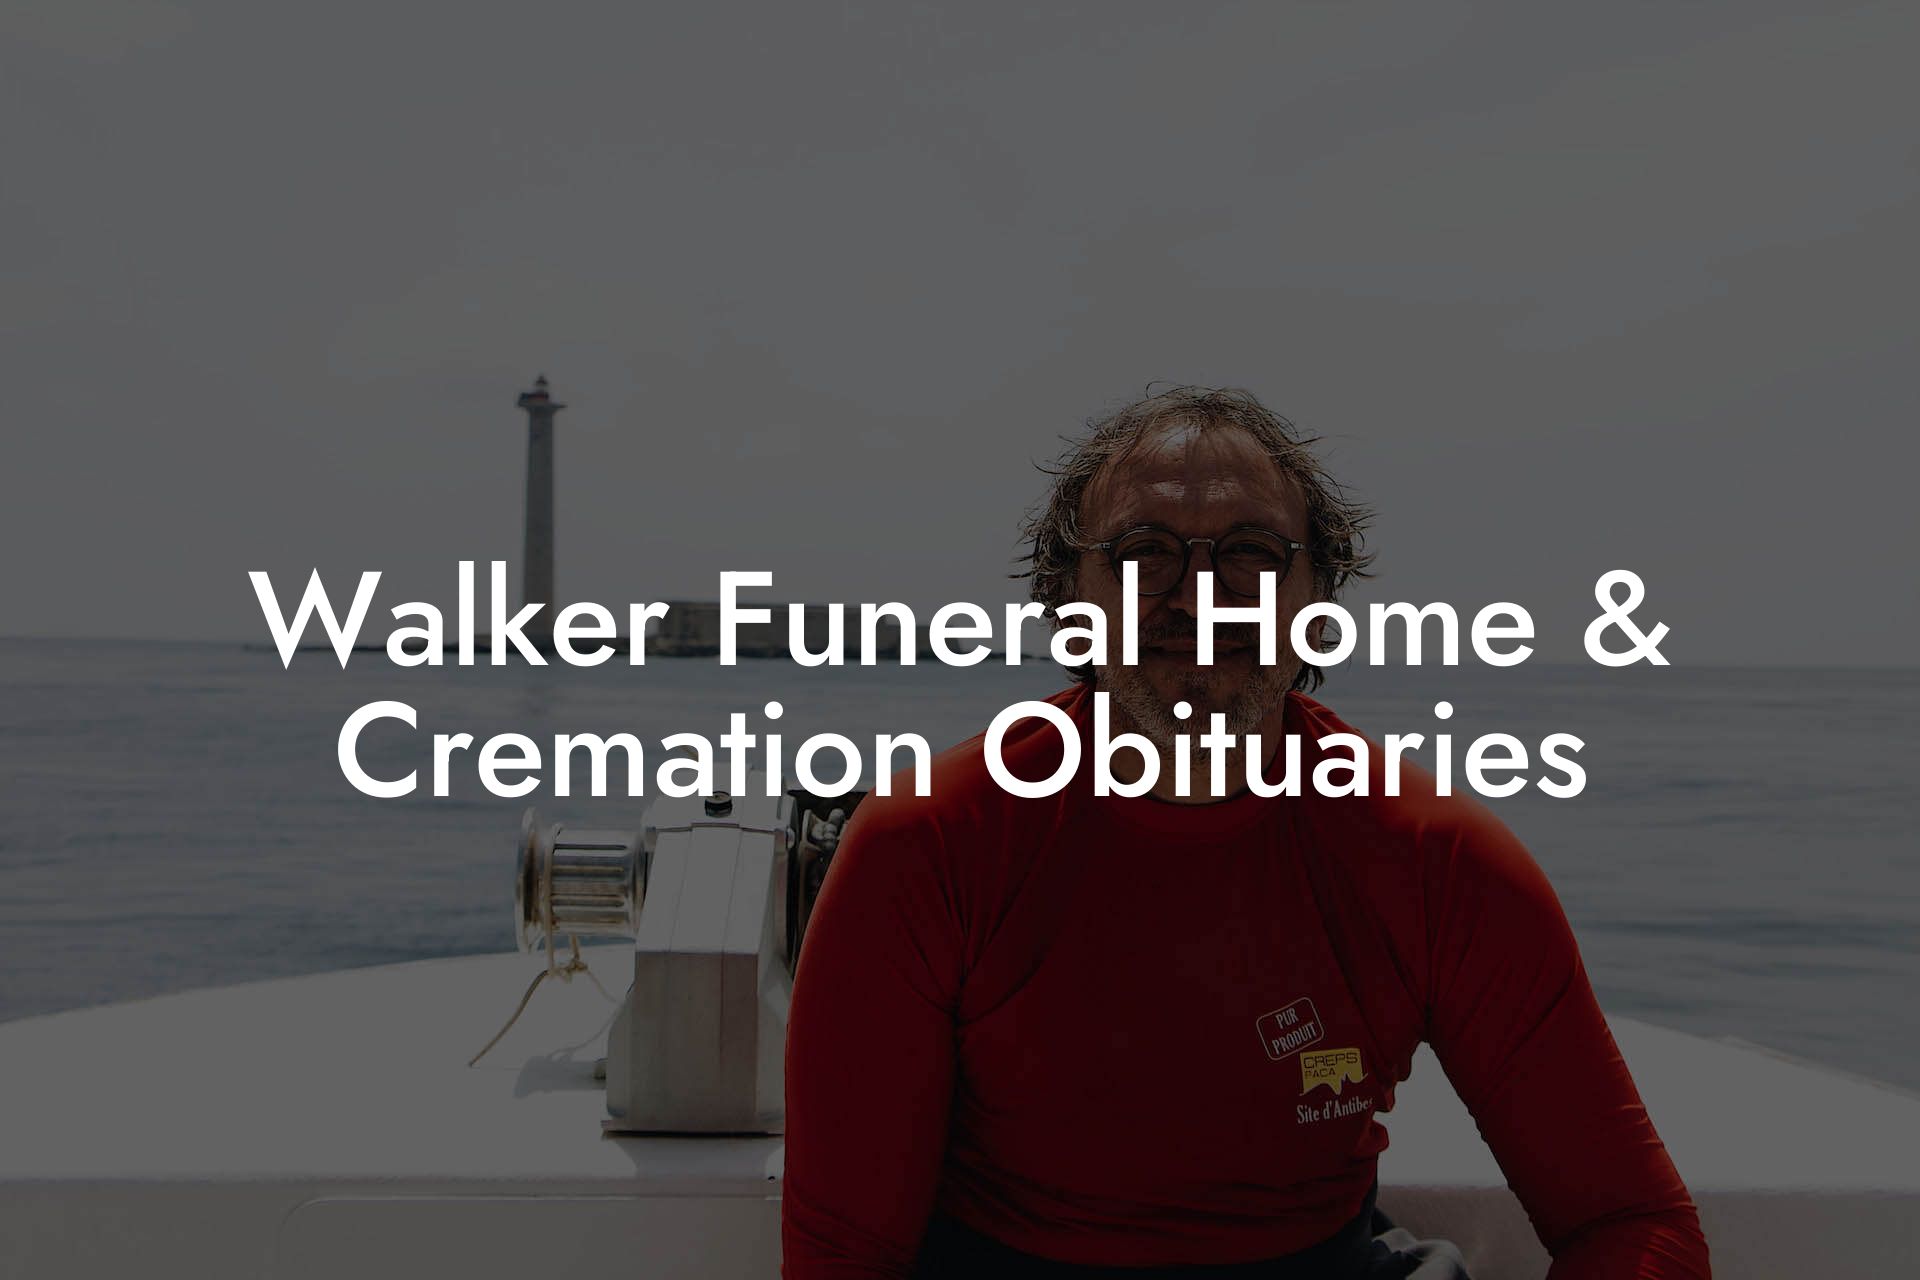 Walker Funeral Home & Cremation Obituaries